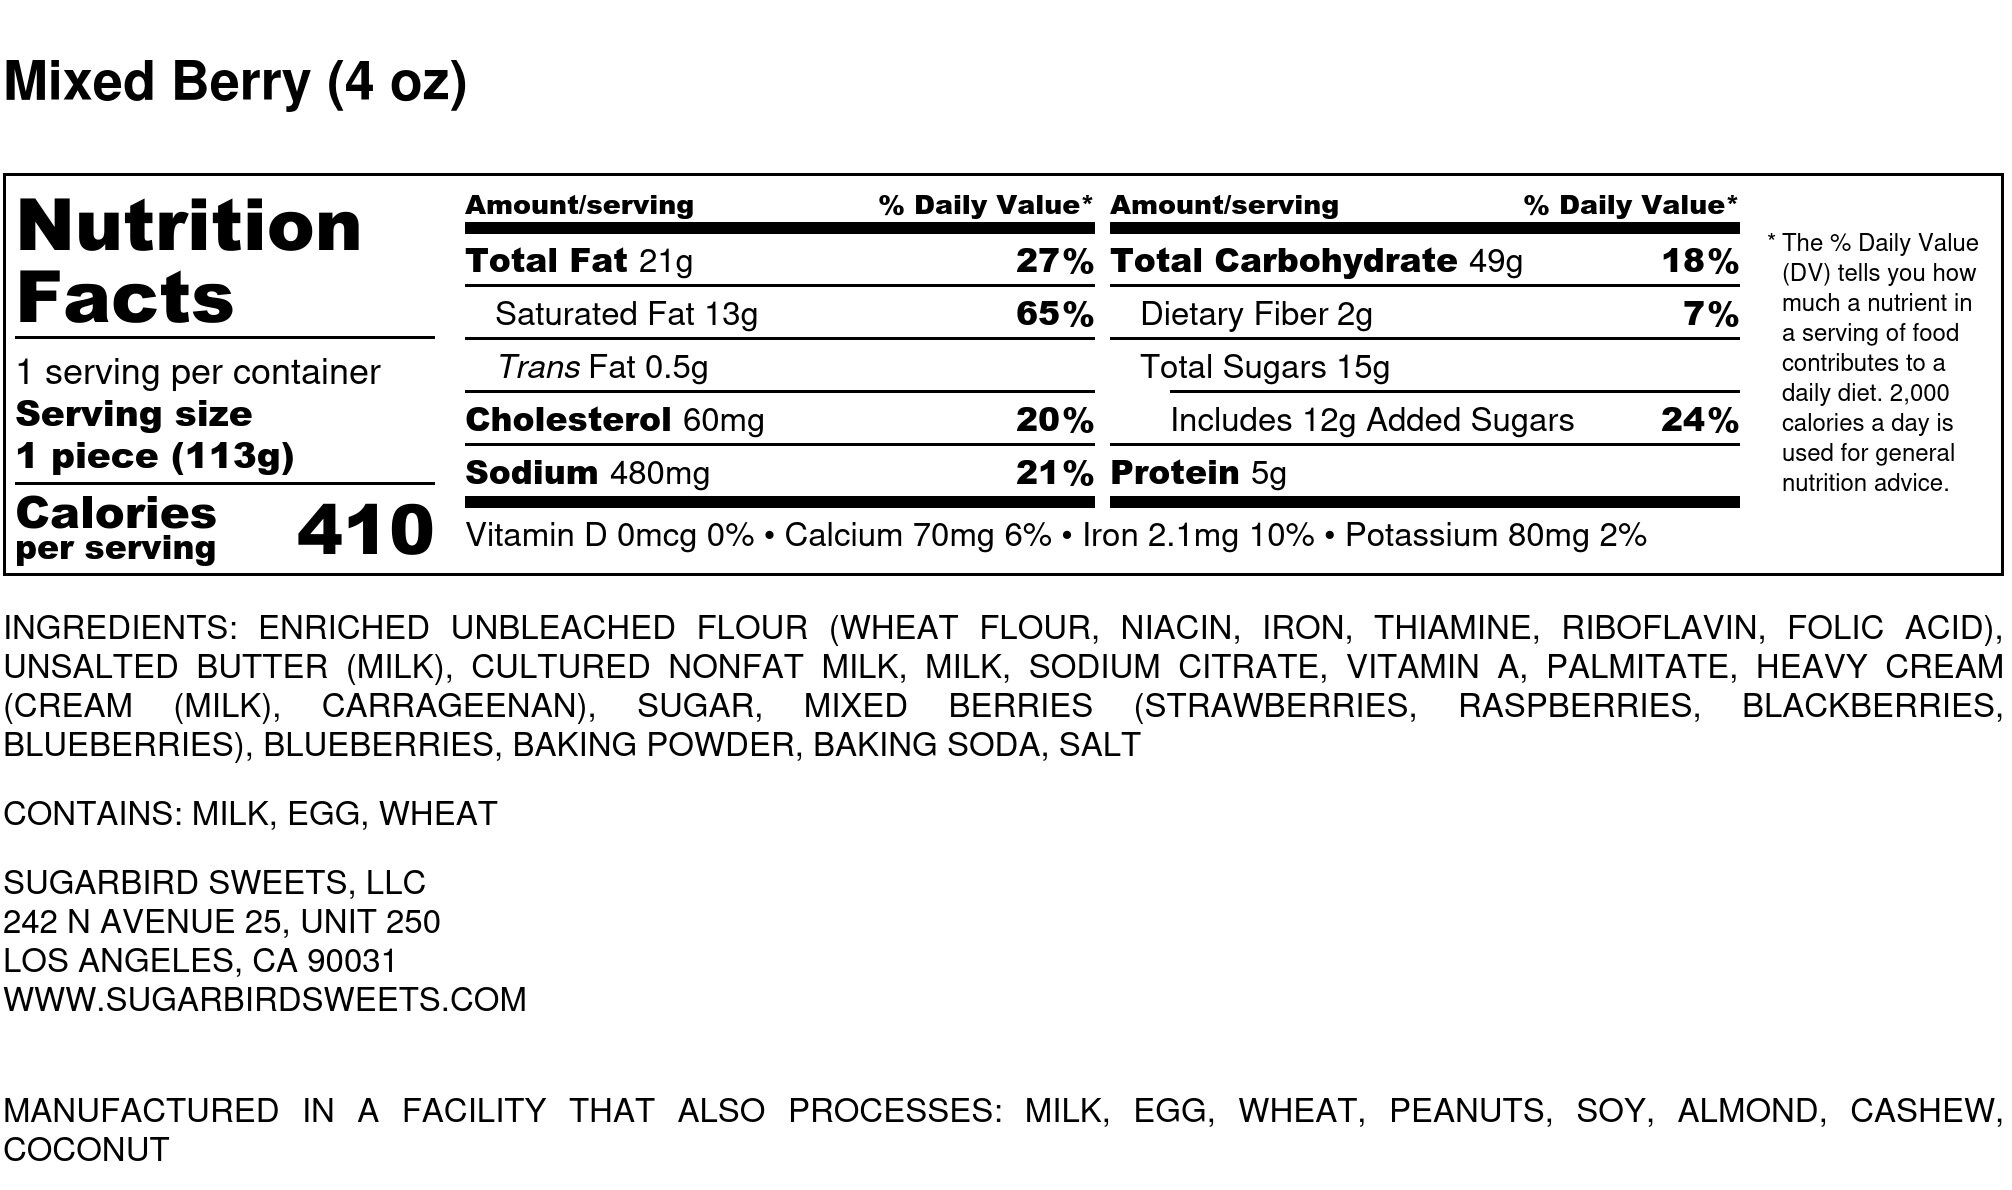 Mixed Berry (4 oz) - Nutrition Label.jpg